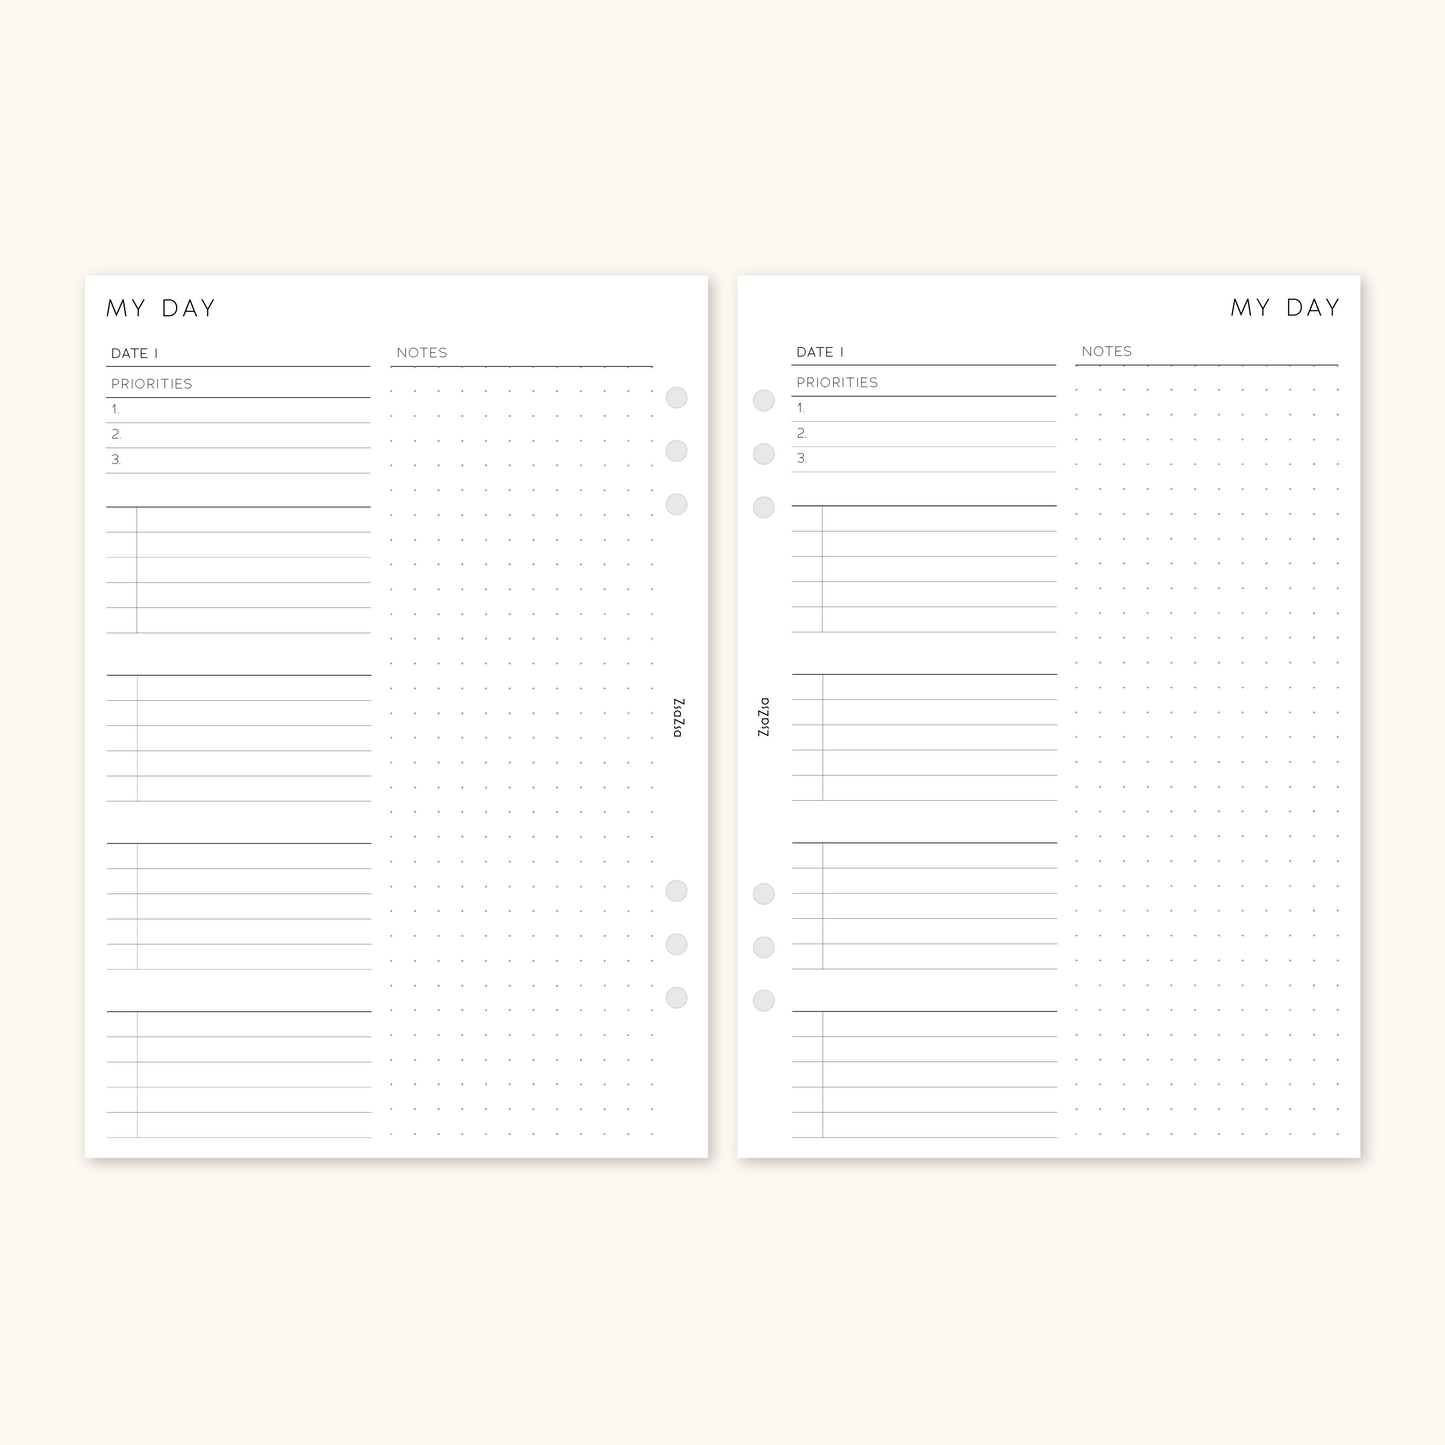 Un-Dated Daily Planner Insert With a Categorised To-Do List & Notes